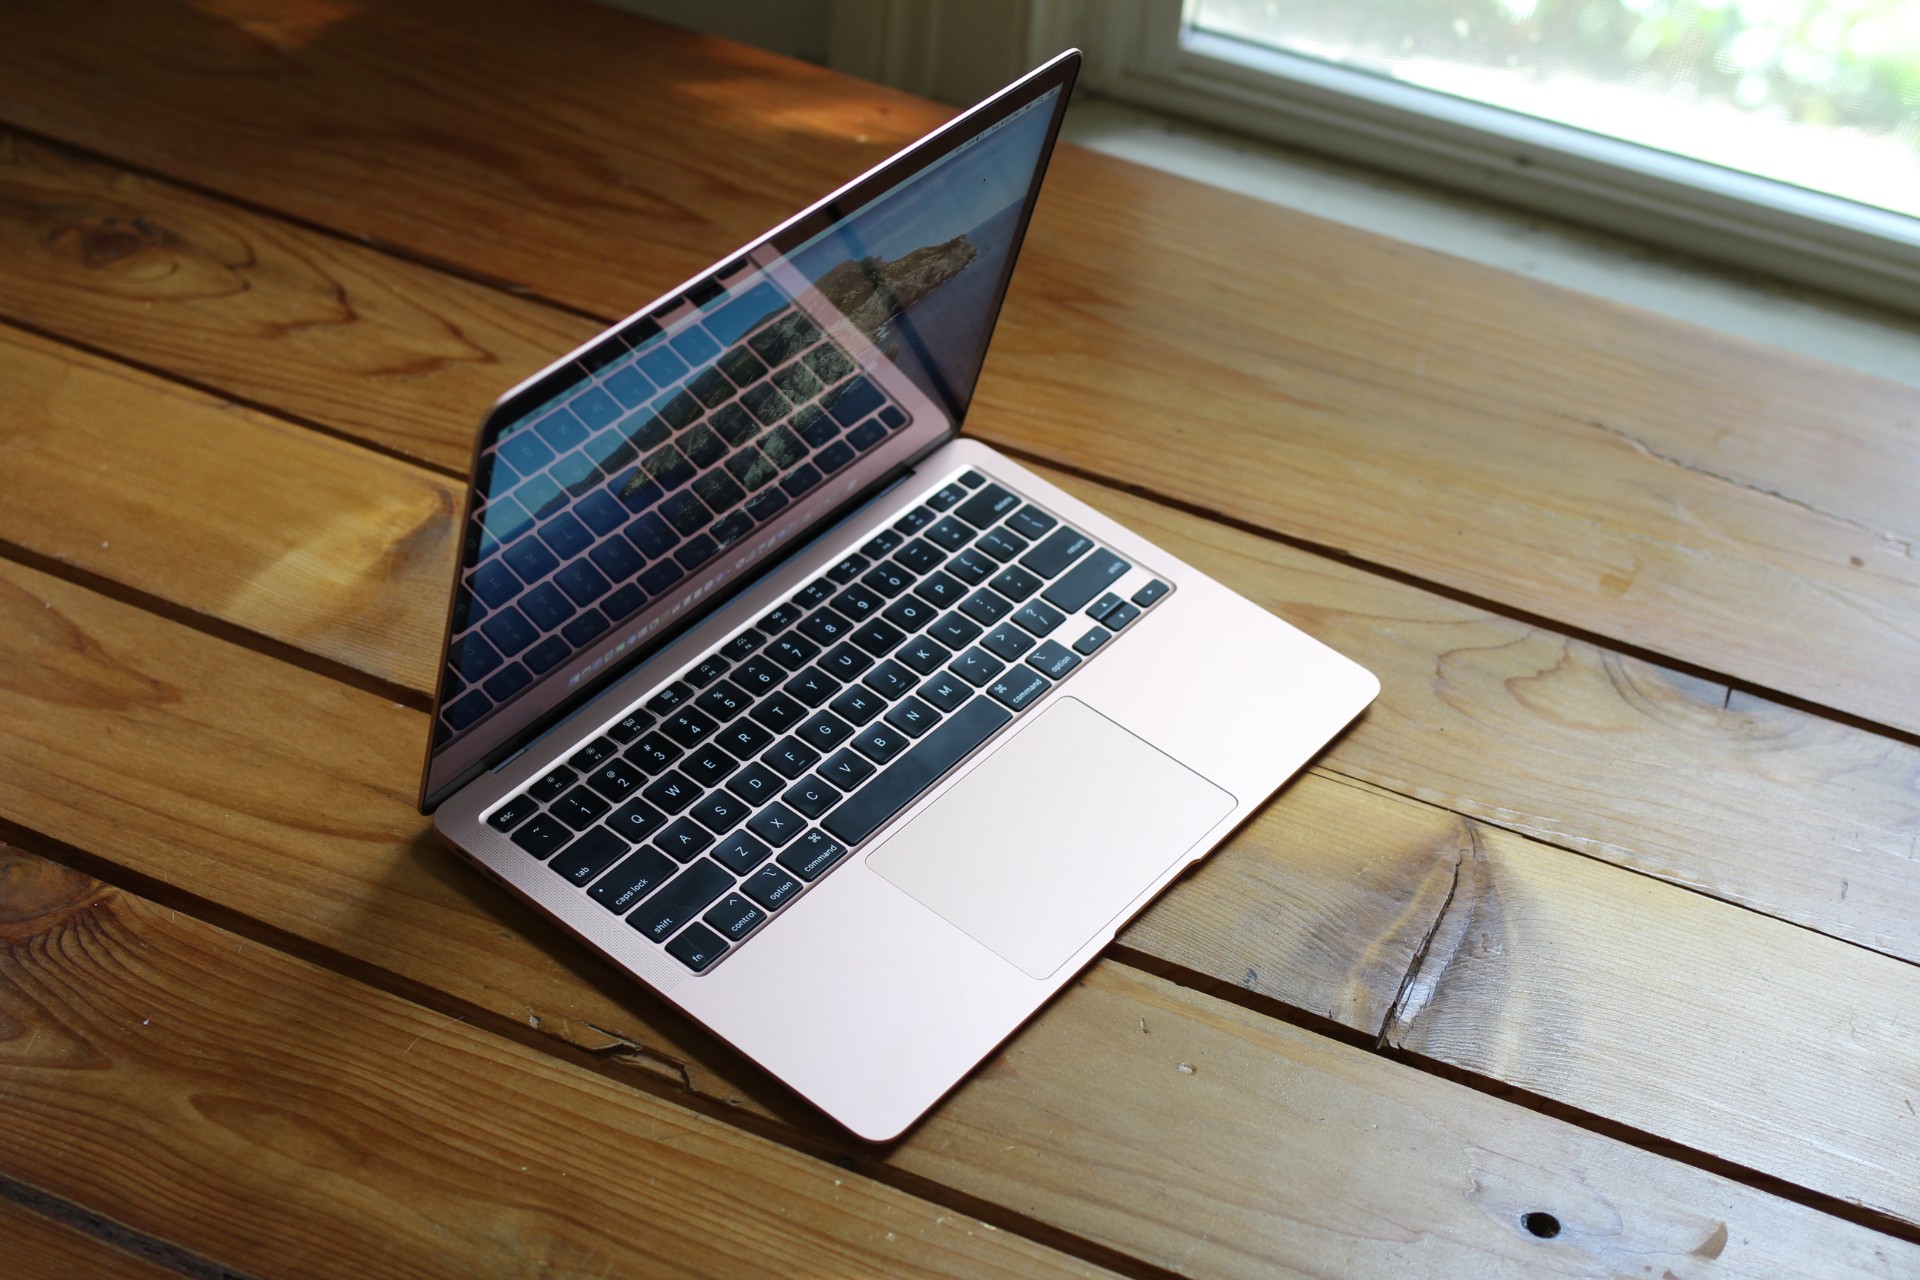 Apple Reveals New Gold MacBook Air With Touch ID